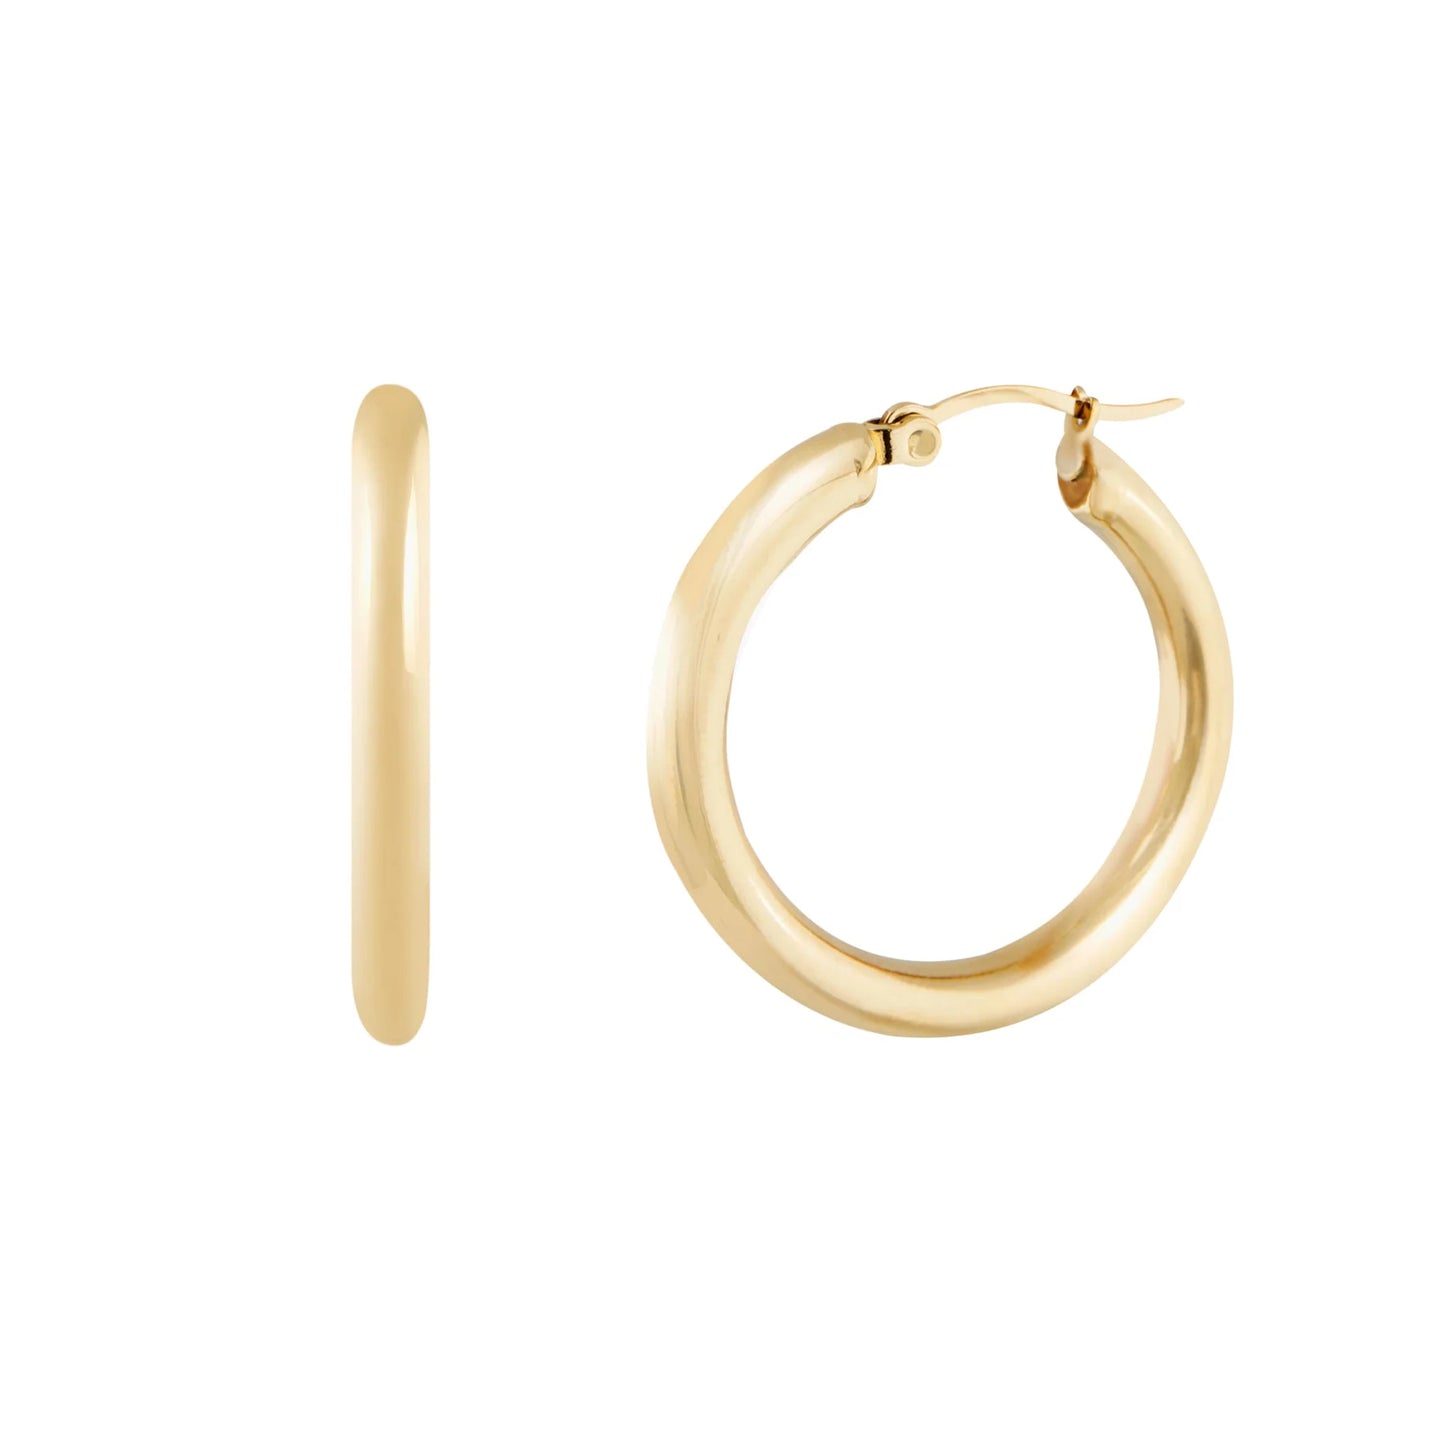 HAILEY rings - gold plated